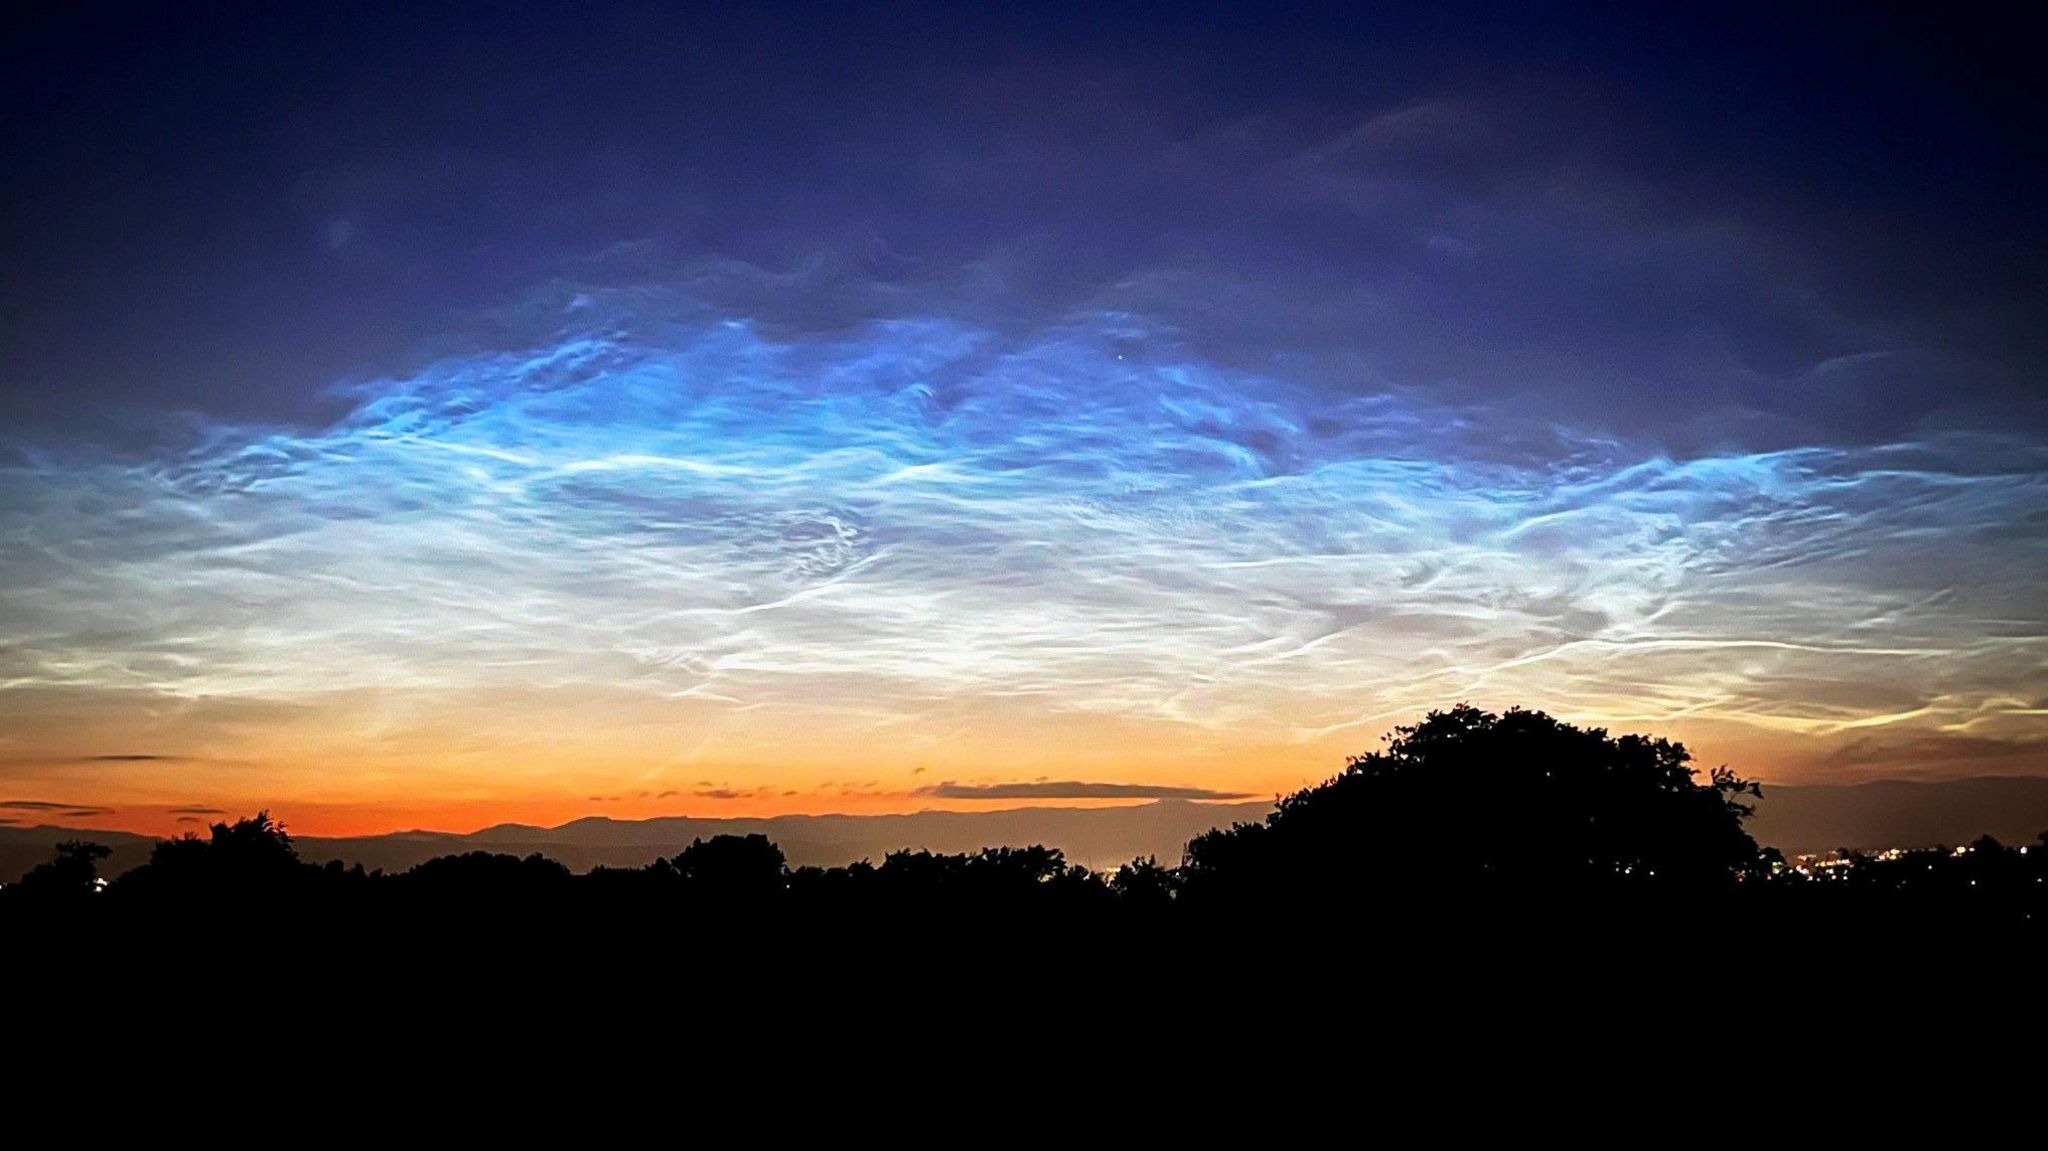 Noctilucent clouds pictured from Hamilton, Lanarkshire